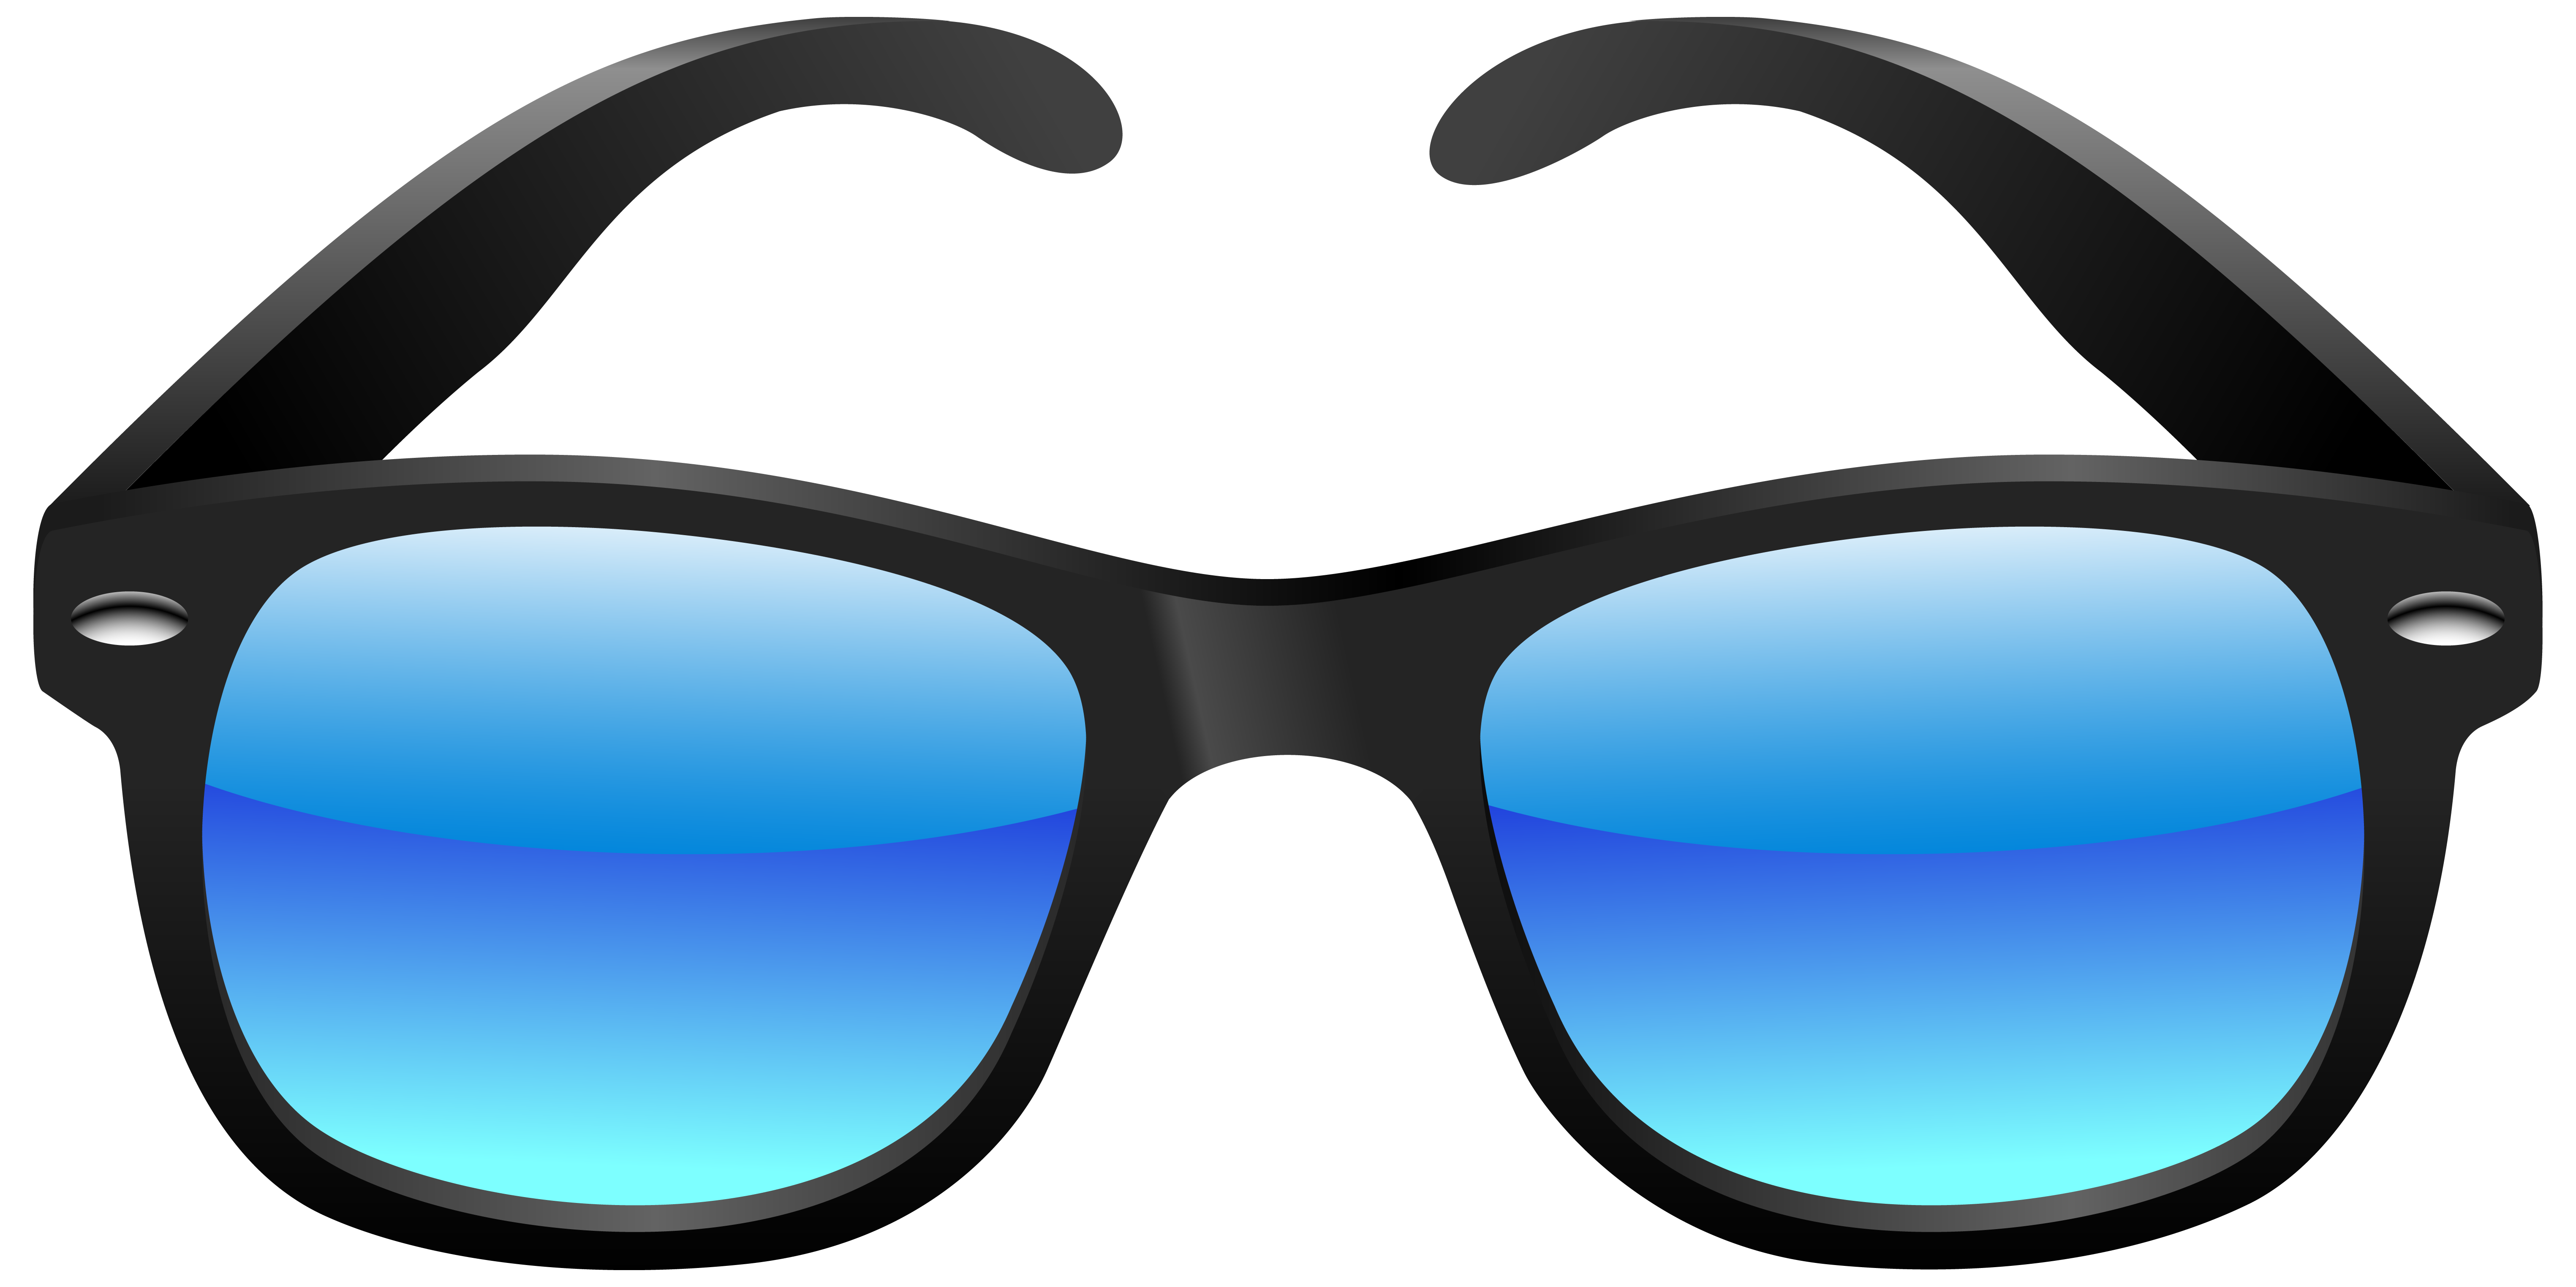 Black and Blue Sunglasses PNG Clipart Image